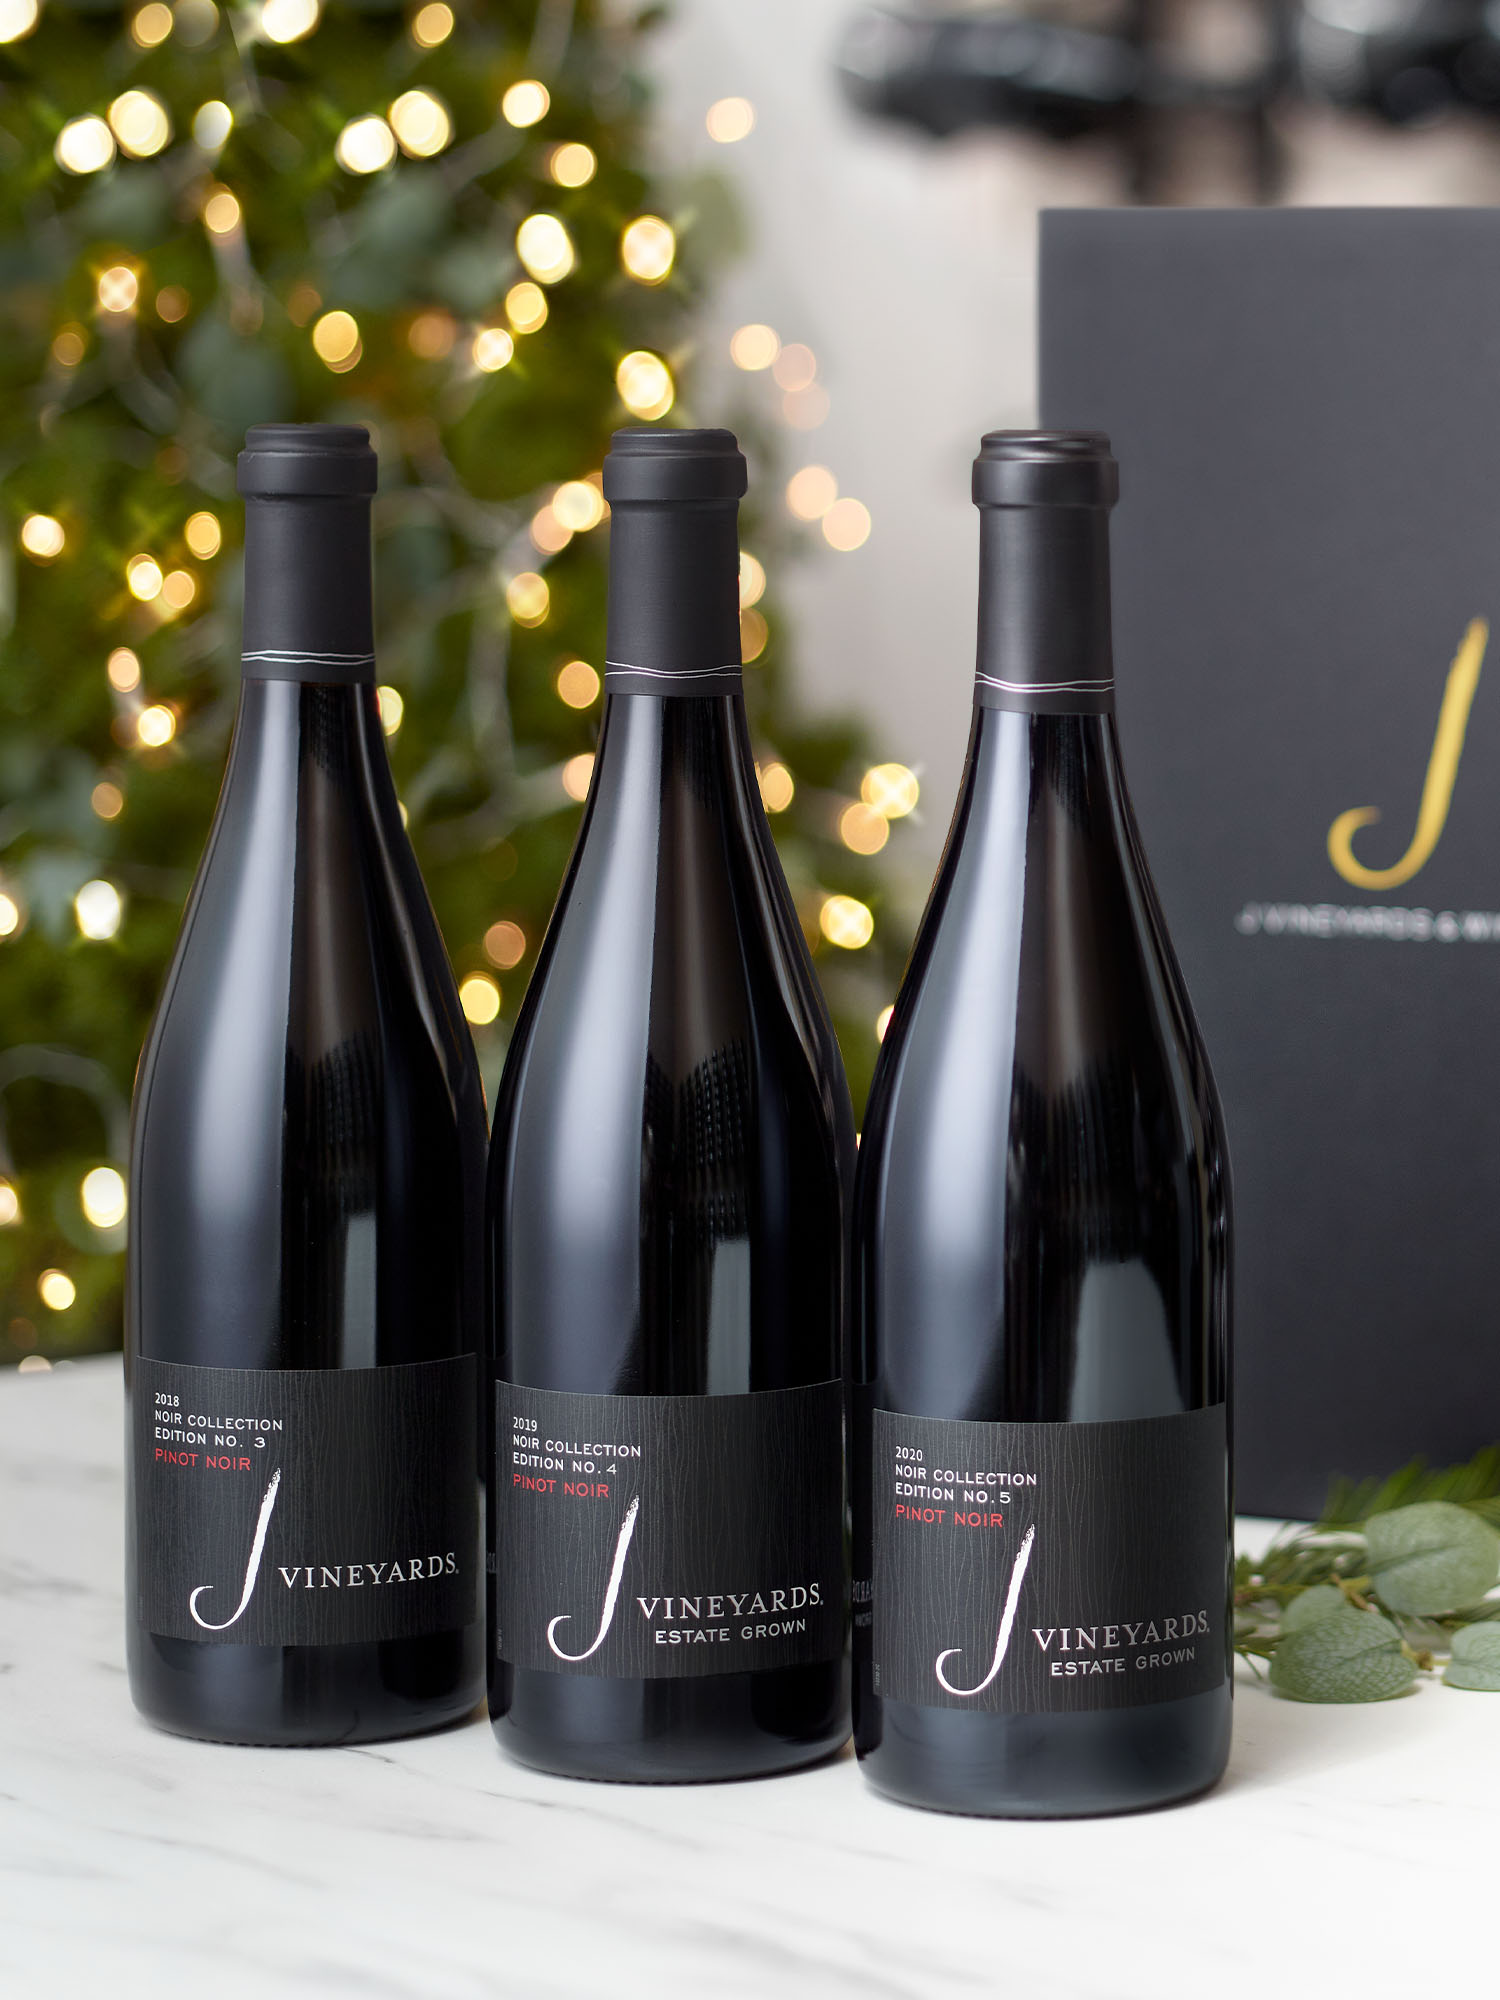 Gifting wine for the holidays